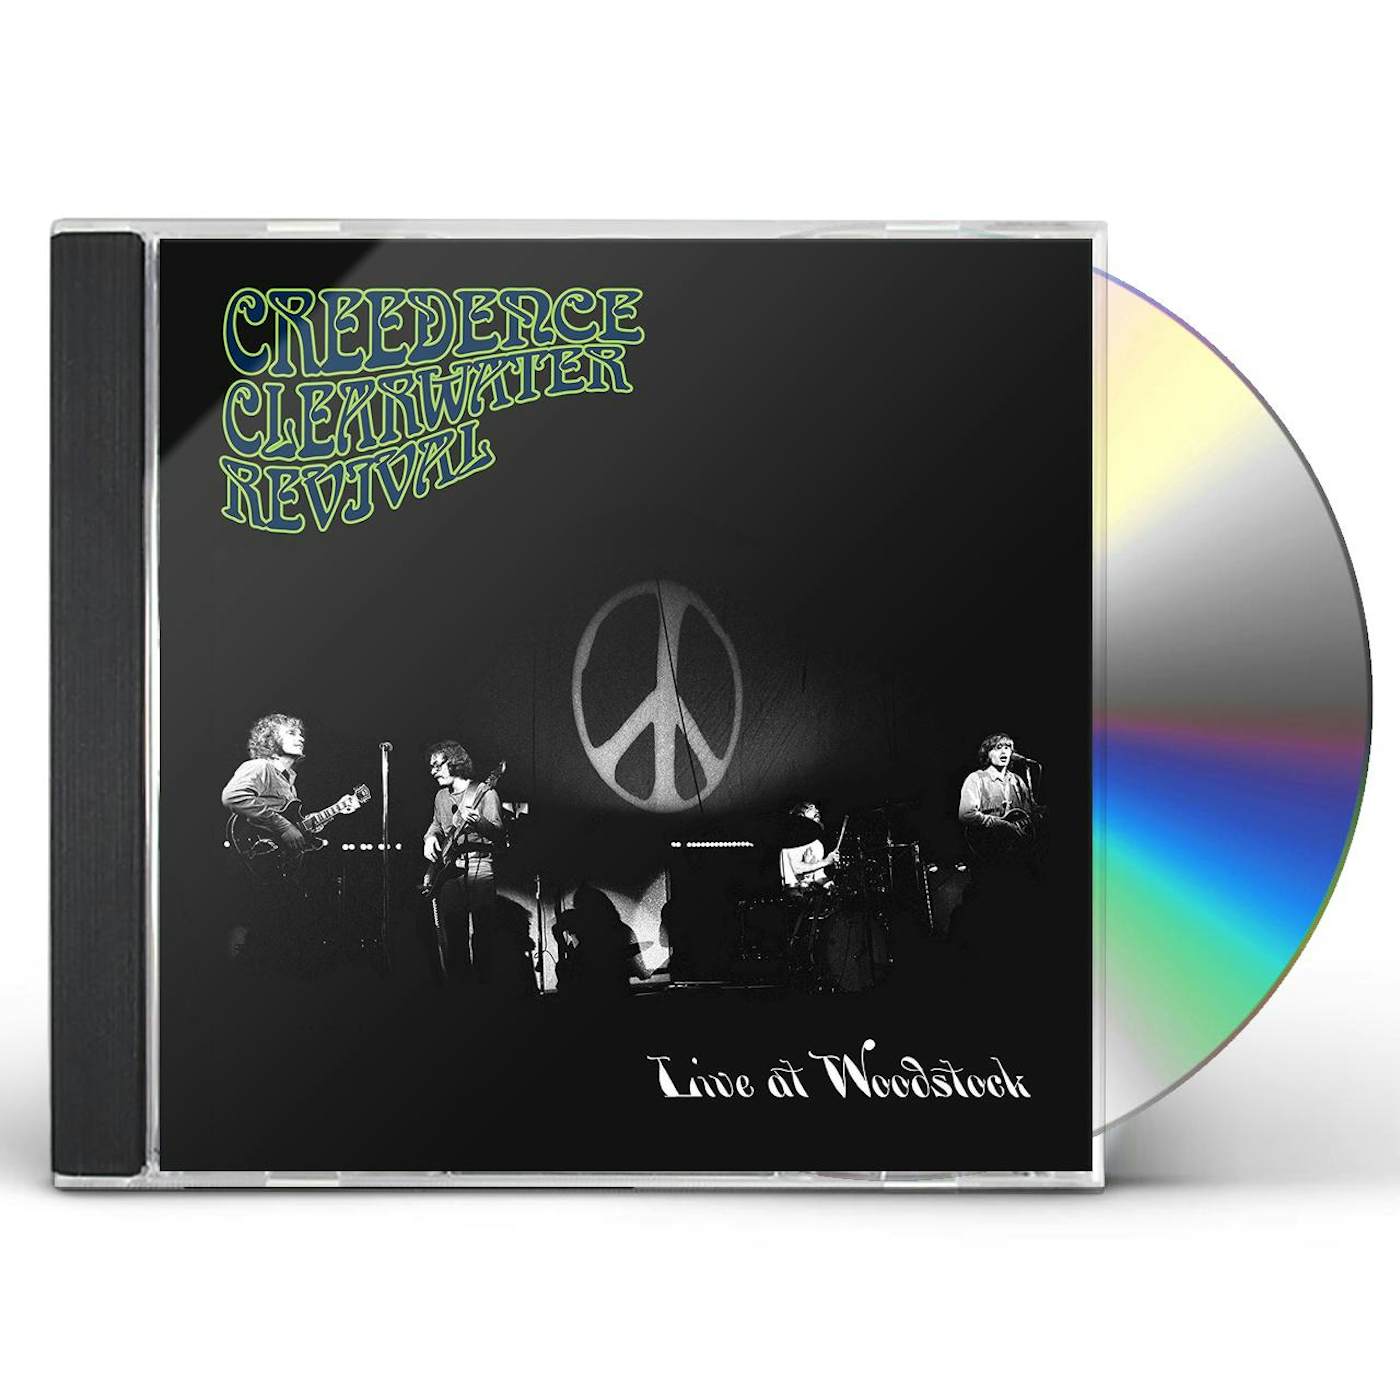 Creedence Clearwater Revival LIVE AT WOODSTOCK CD